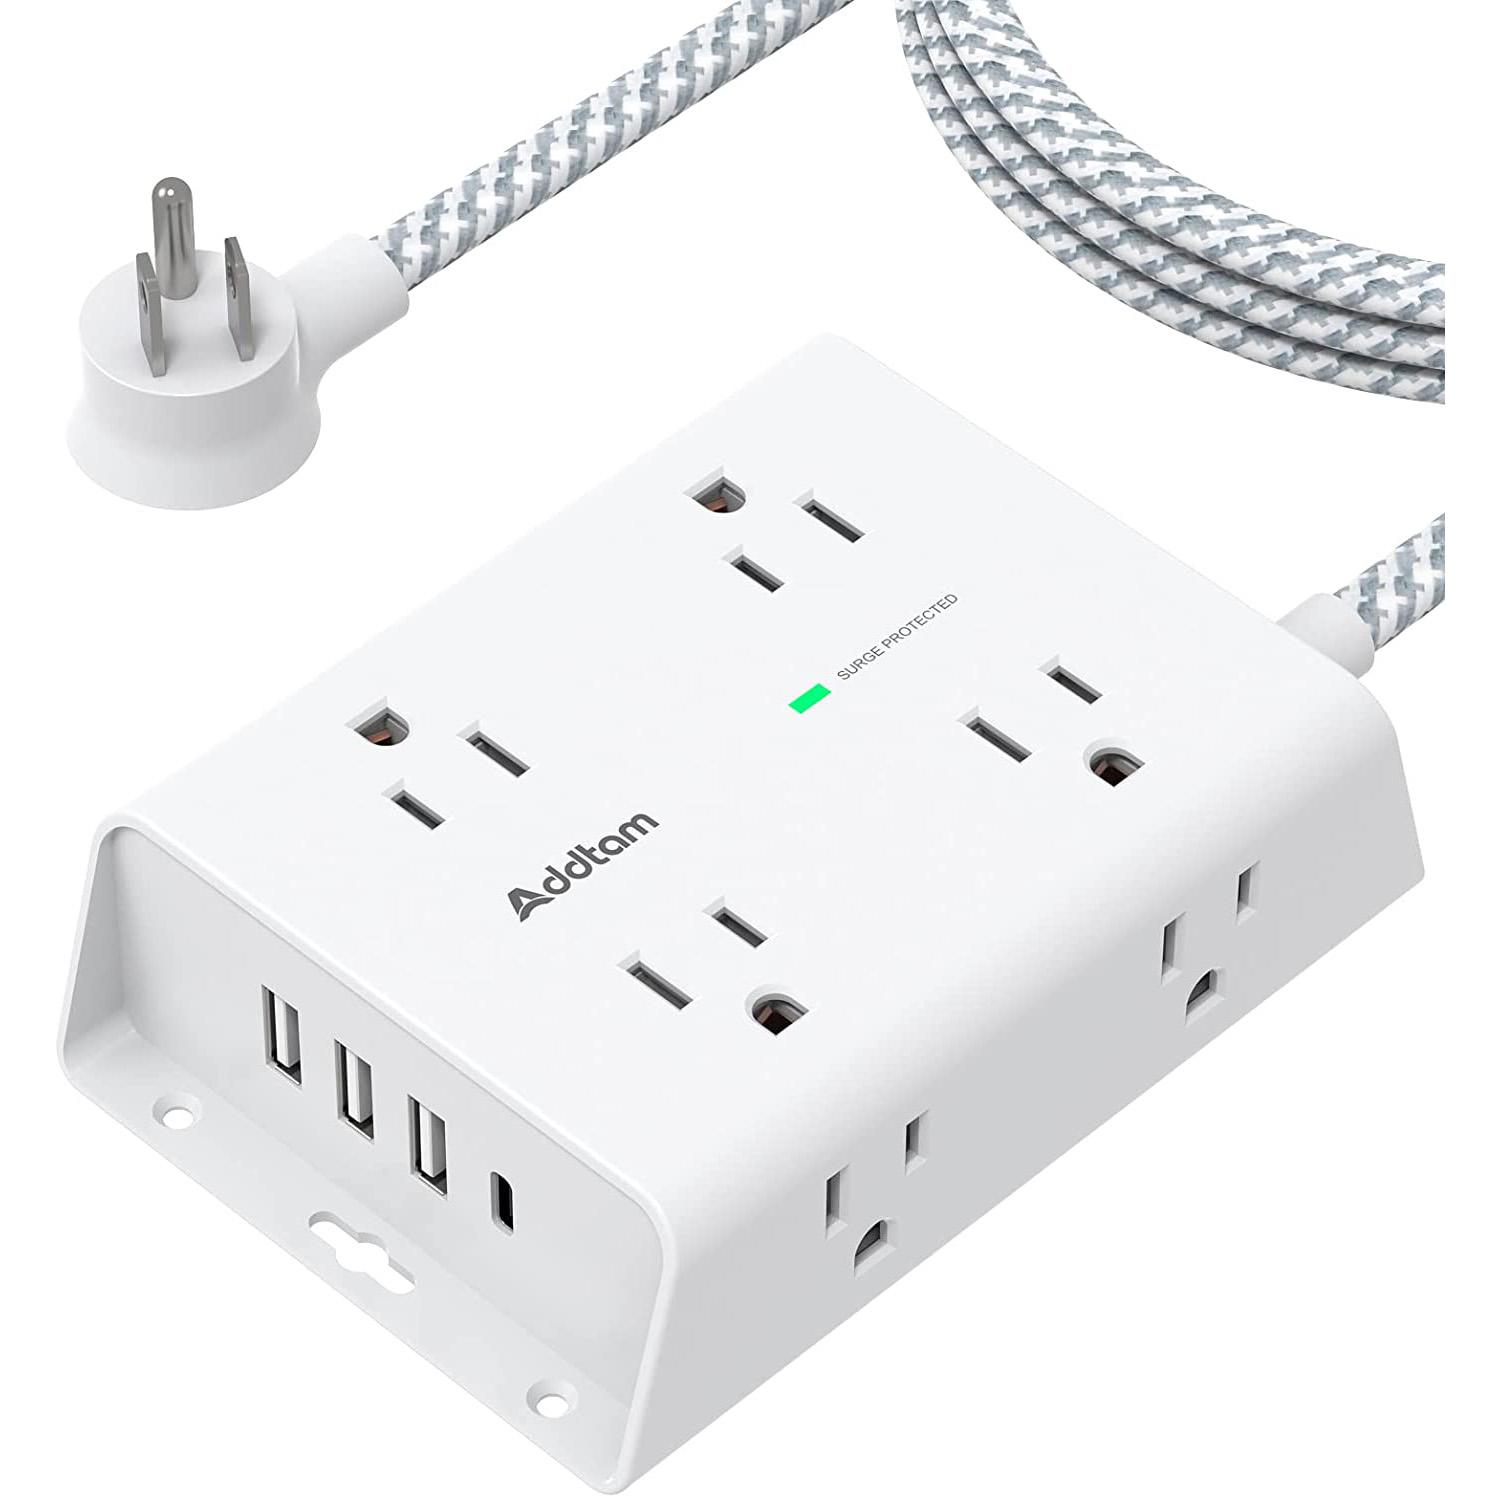 Surge Protector 8 Outlets 4 USB Ports Power Strip for $14.09